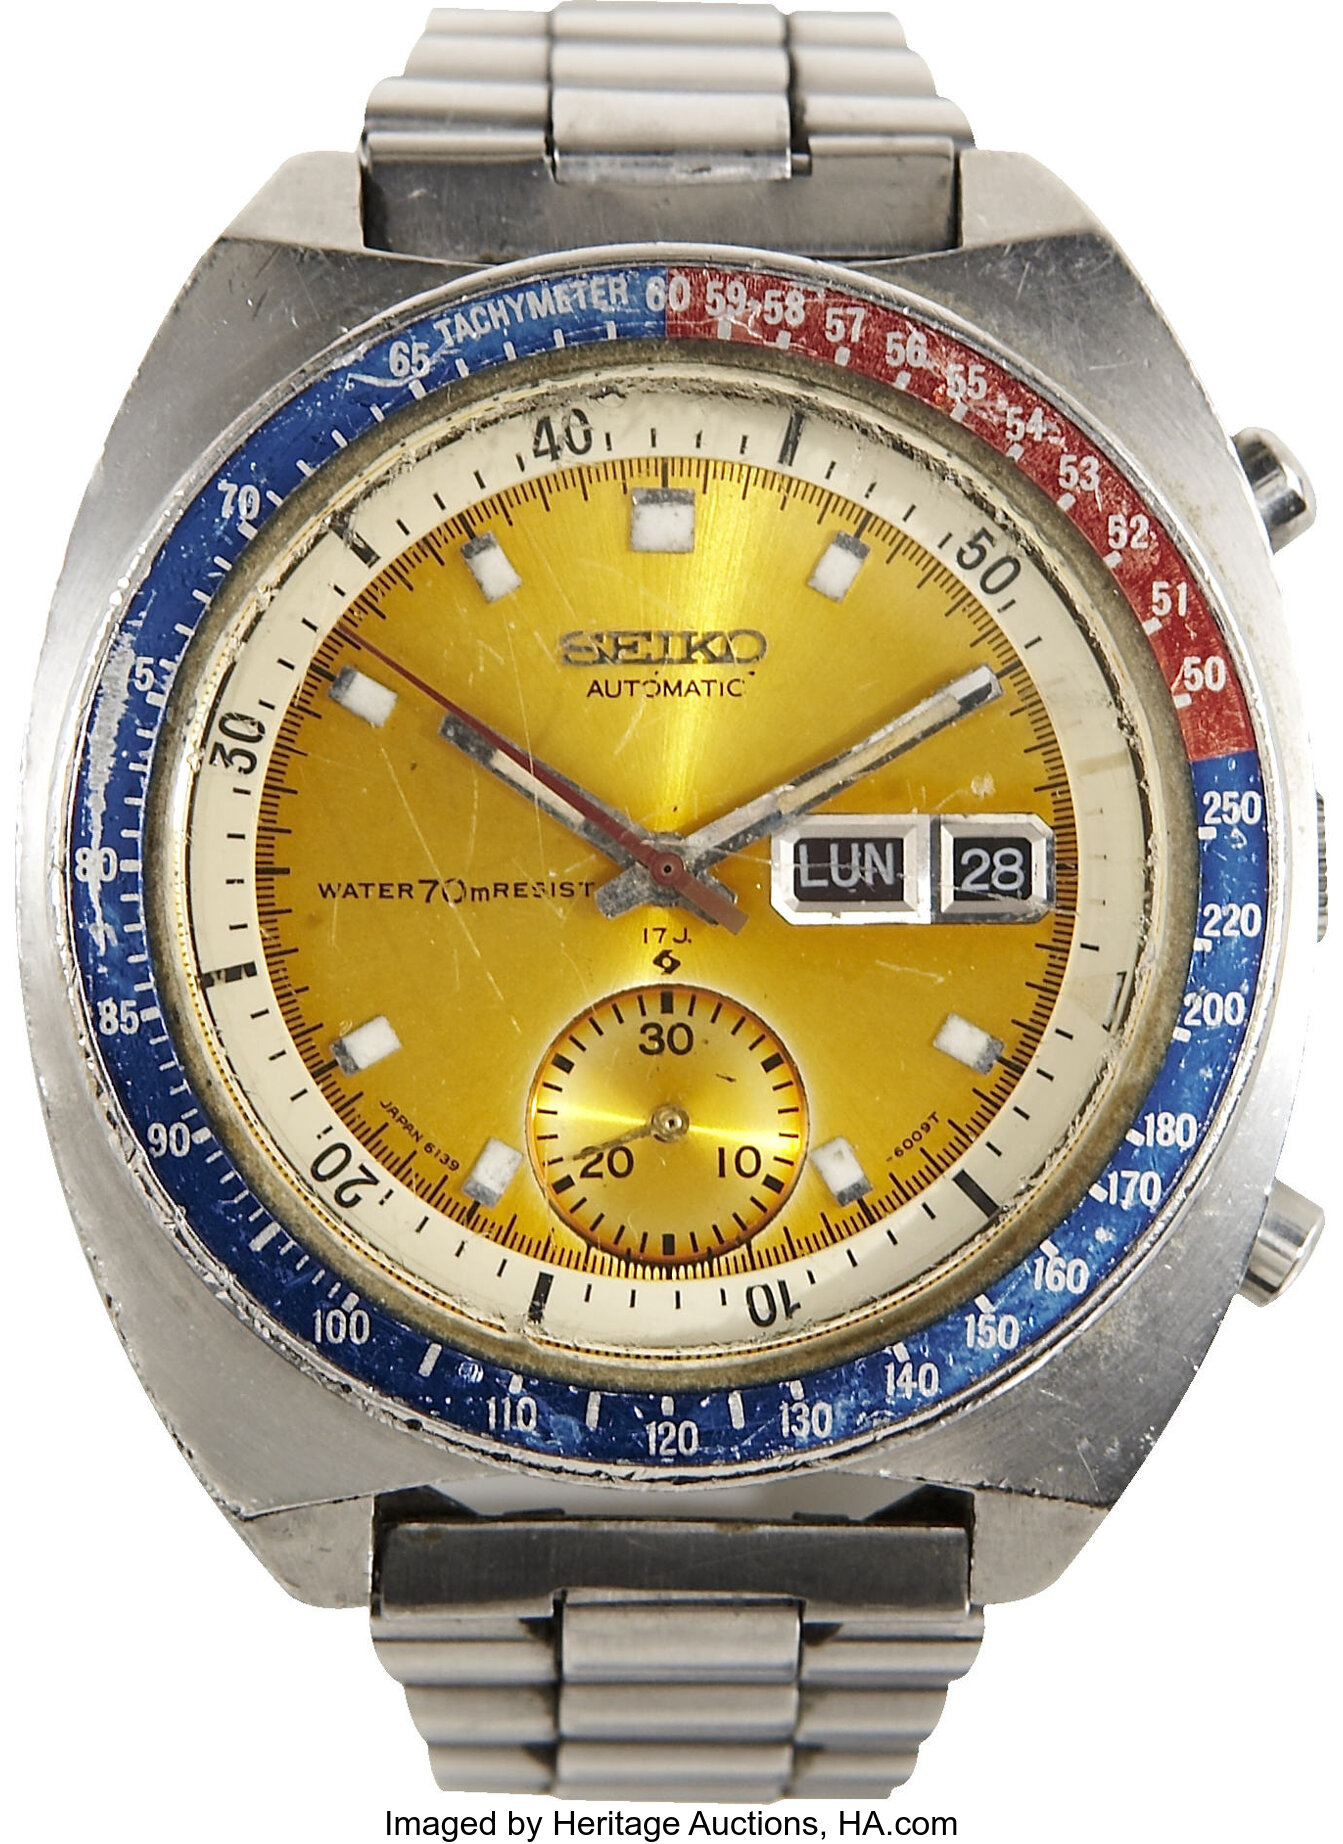 William Pogue's Seiko 6139 Watch Flown on Board the Skylab 4 | Lot #41138 |  Heritage Auctions